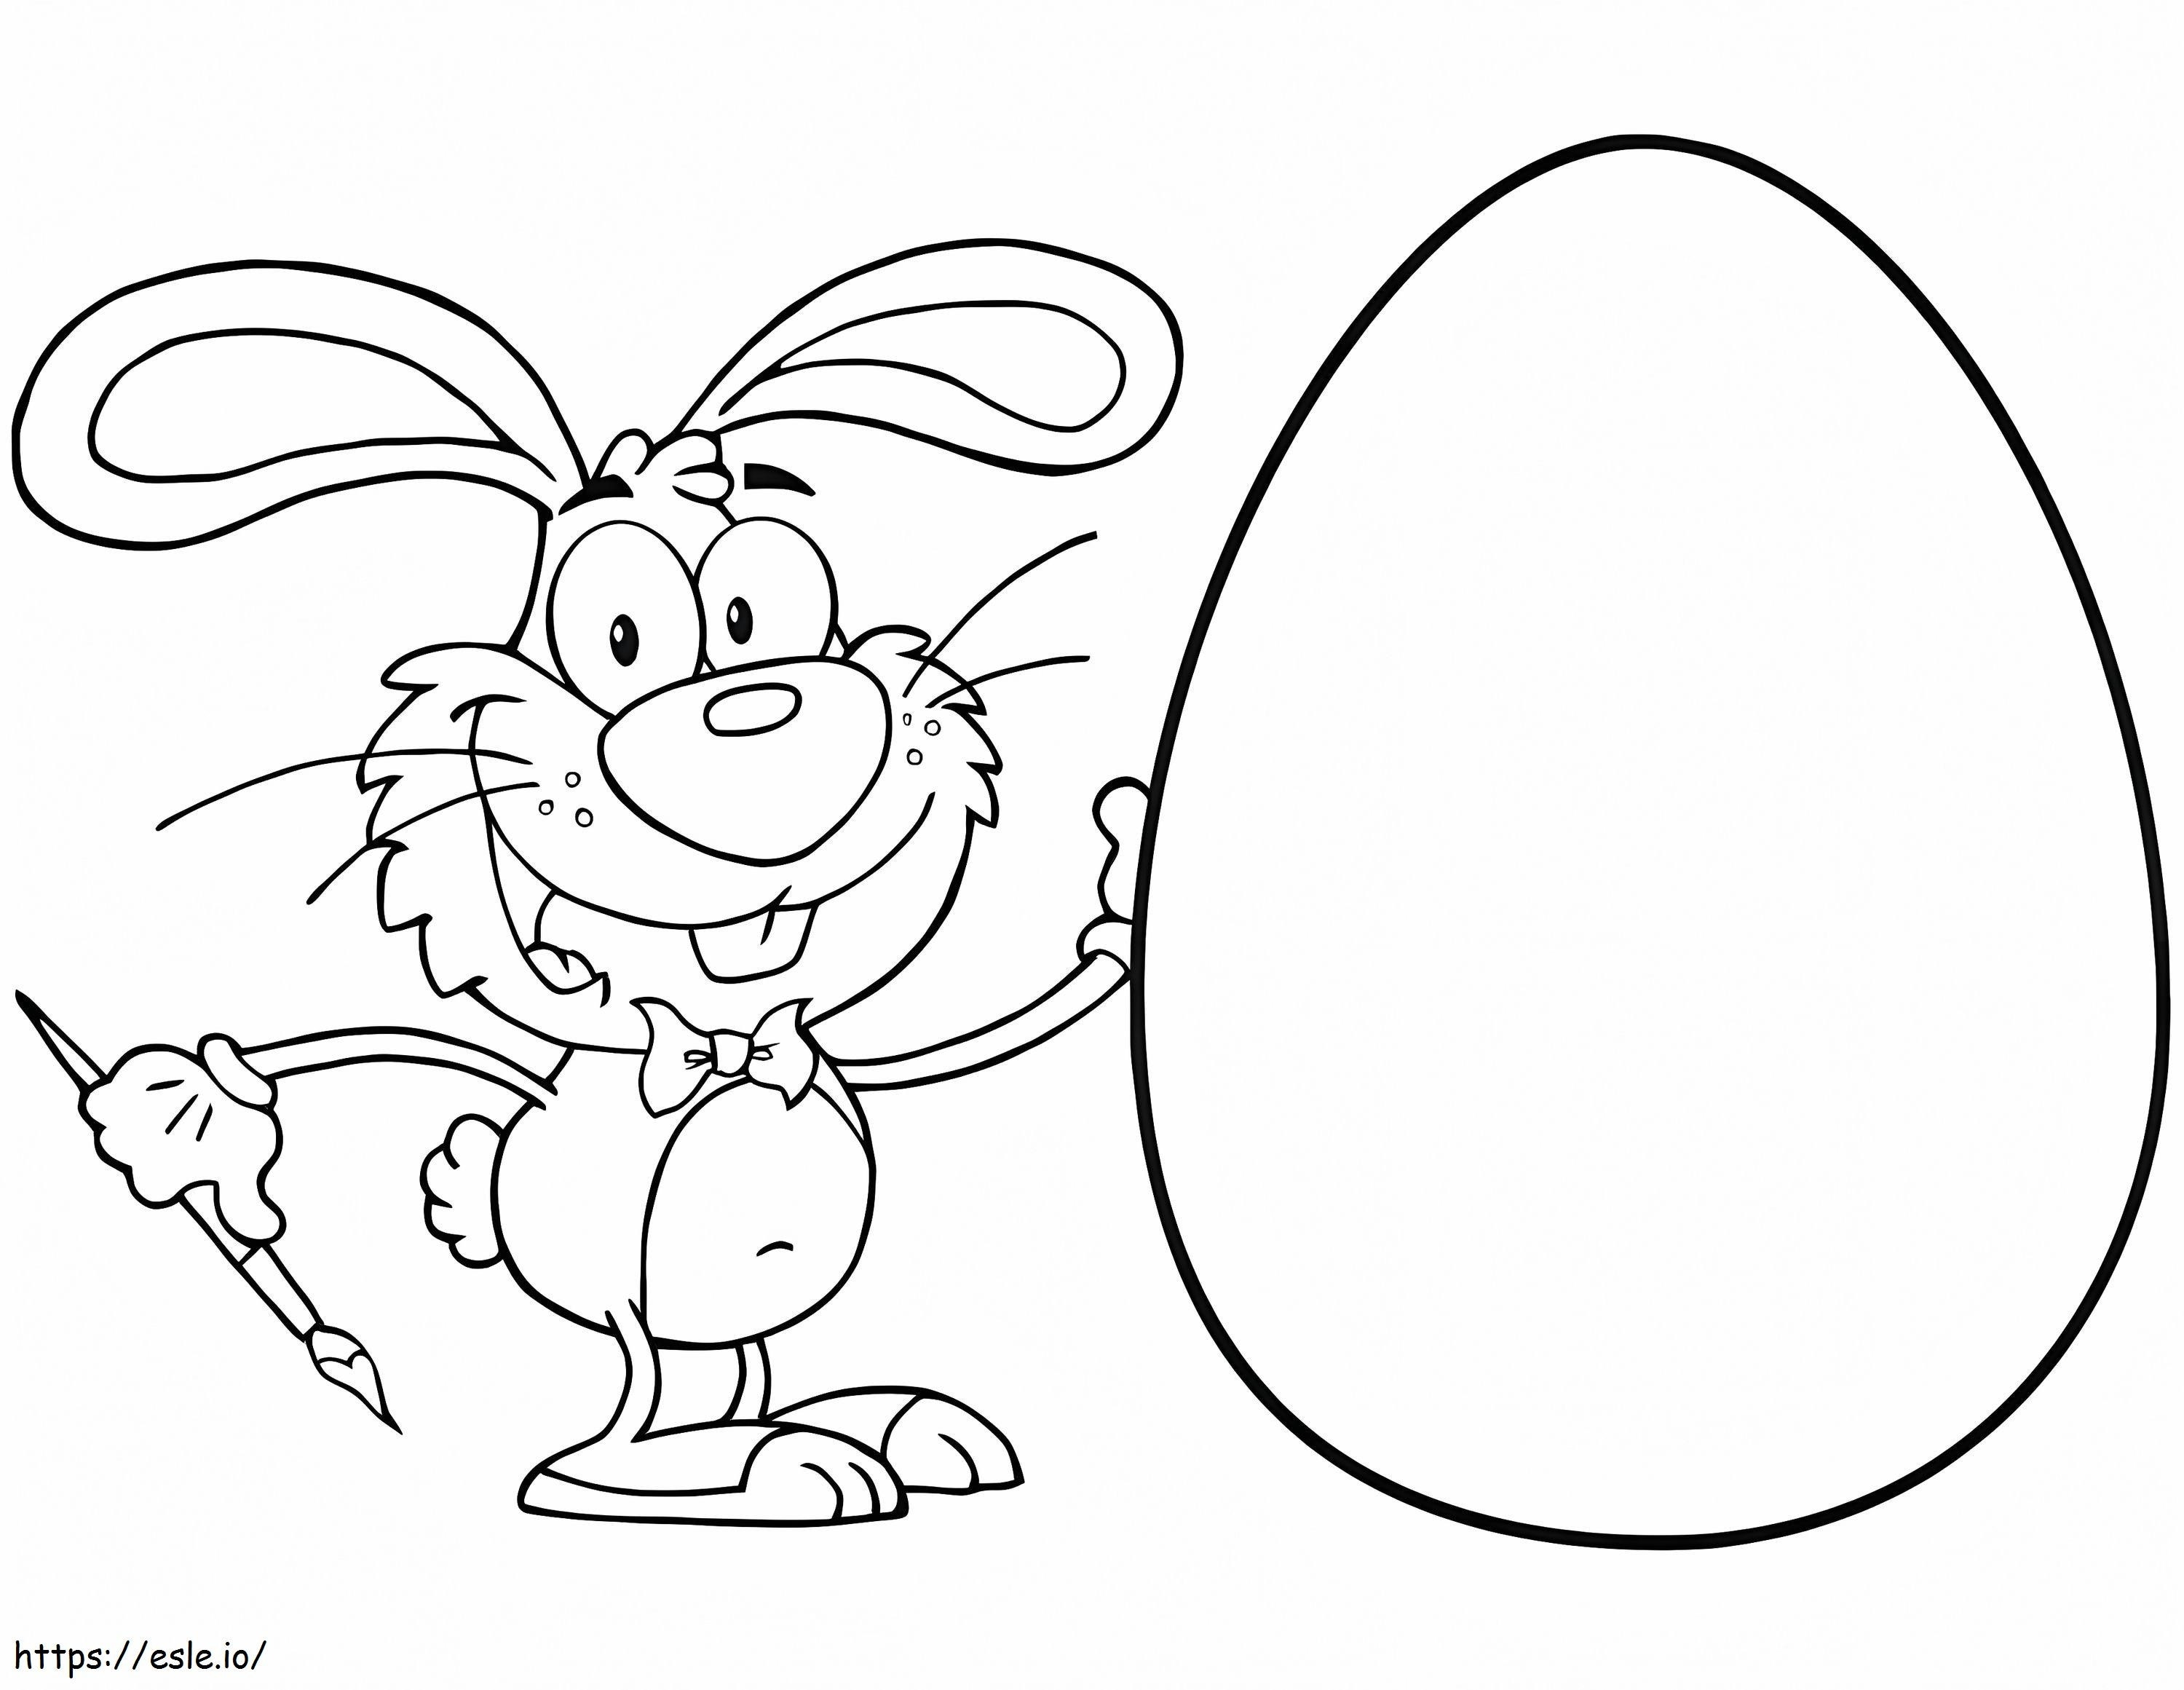 Easter Bunny With Big Egg coloring page